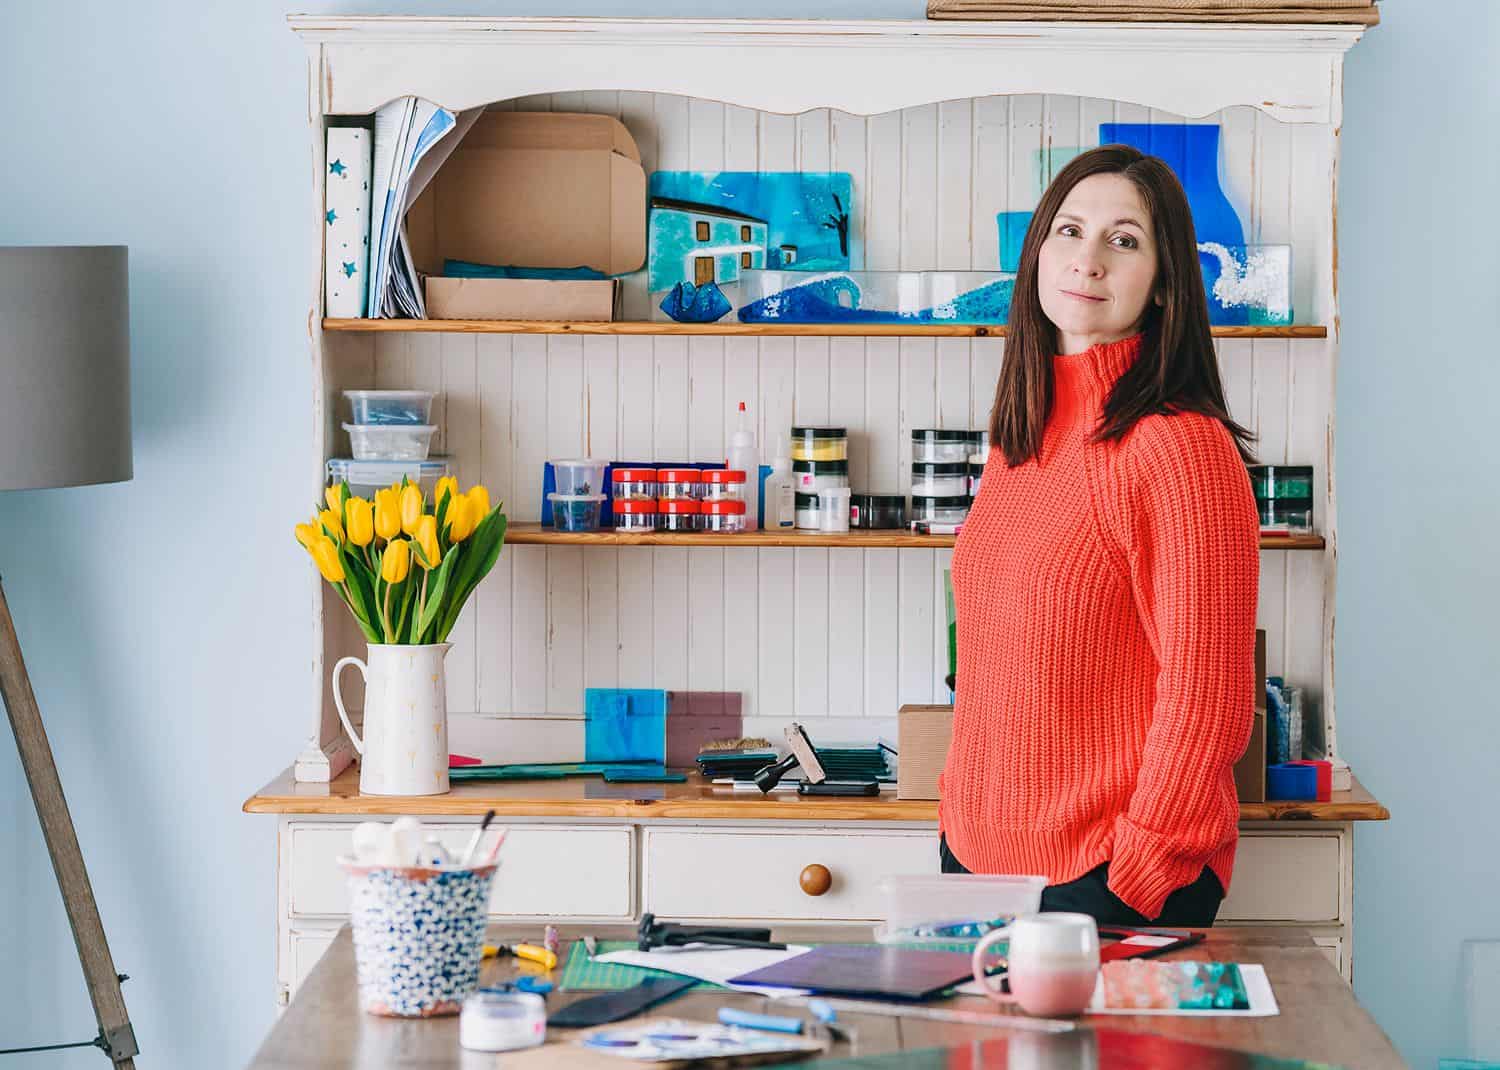 A brunette woman in a bright orange sweater stands in her shop surrounded by artwork